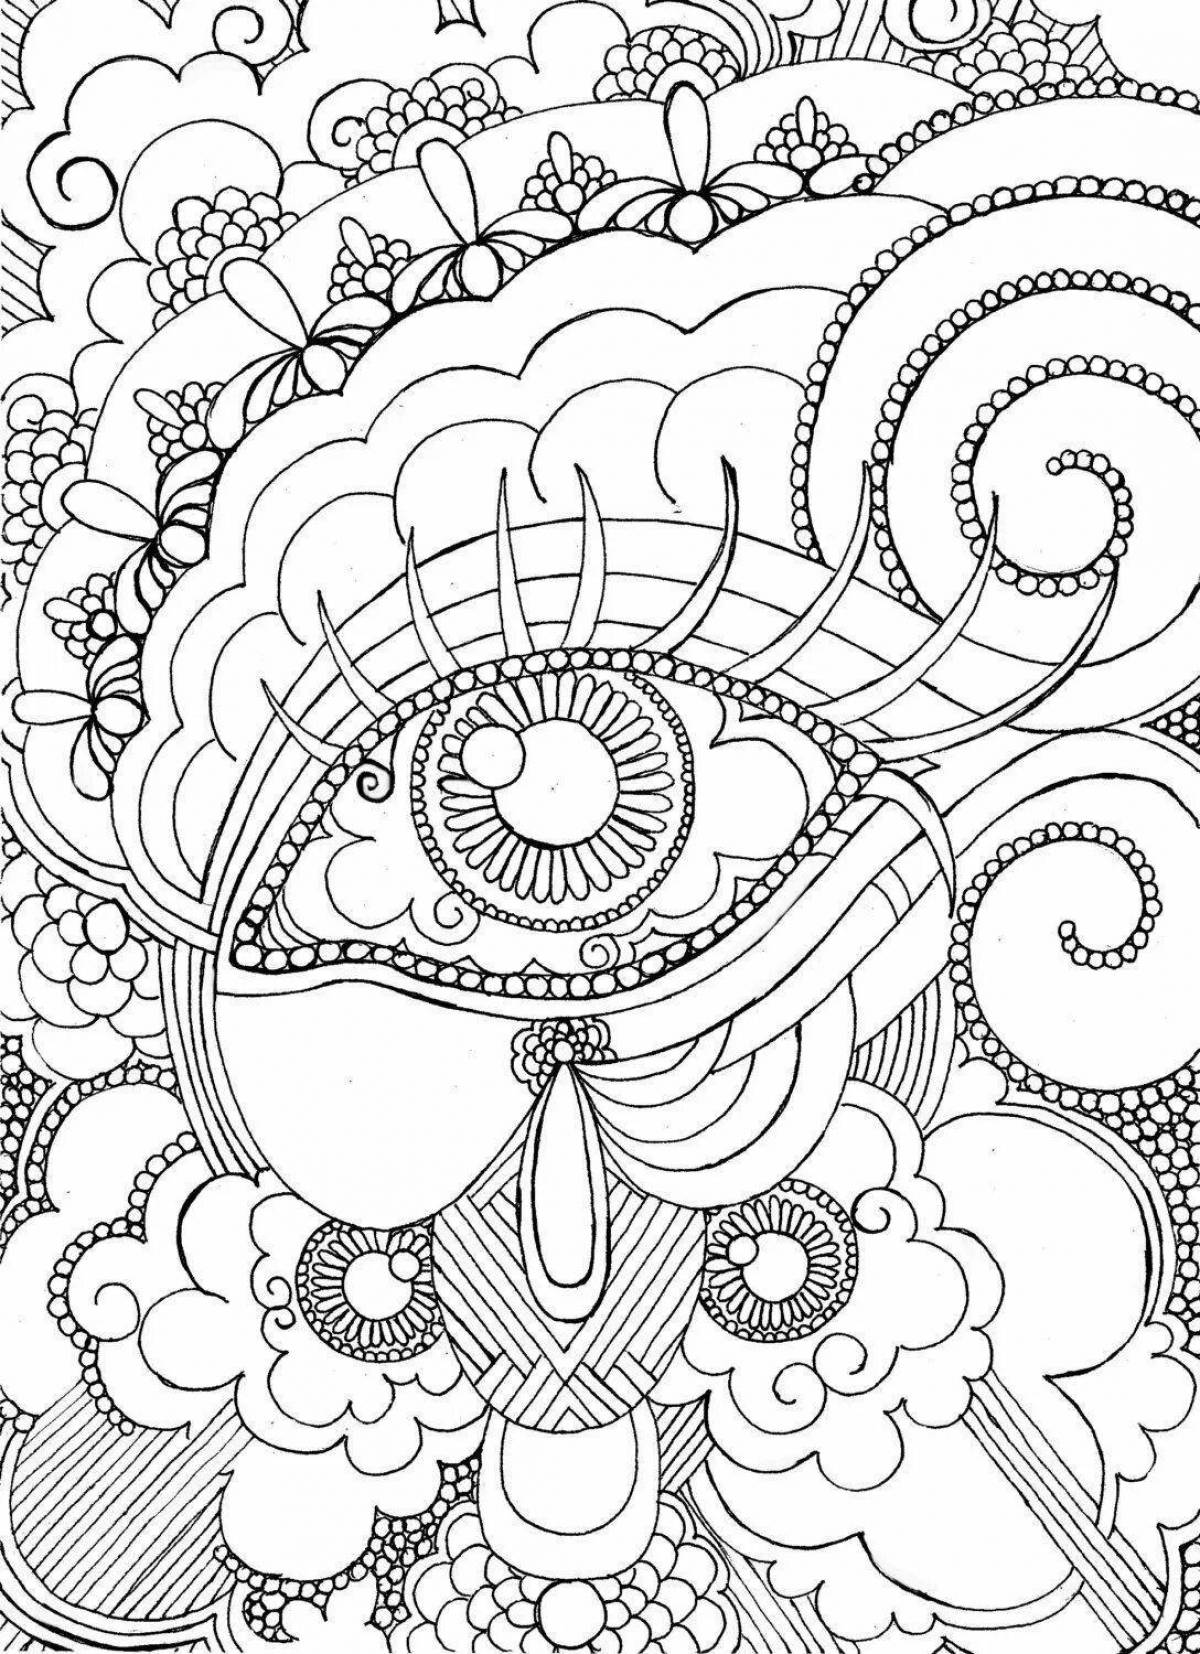 Joyful coloring color therapy